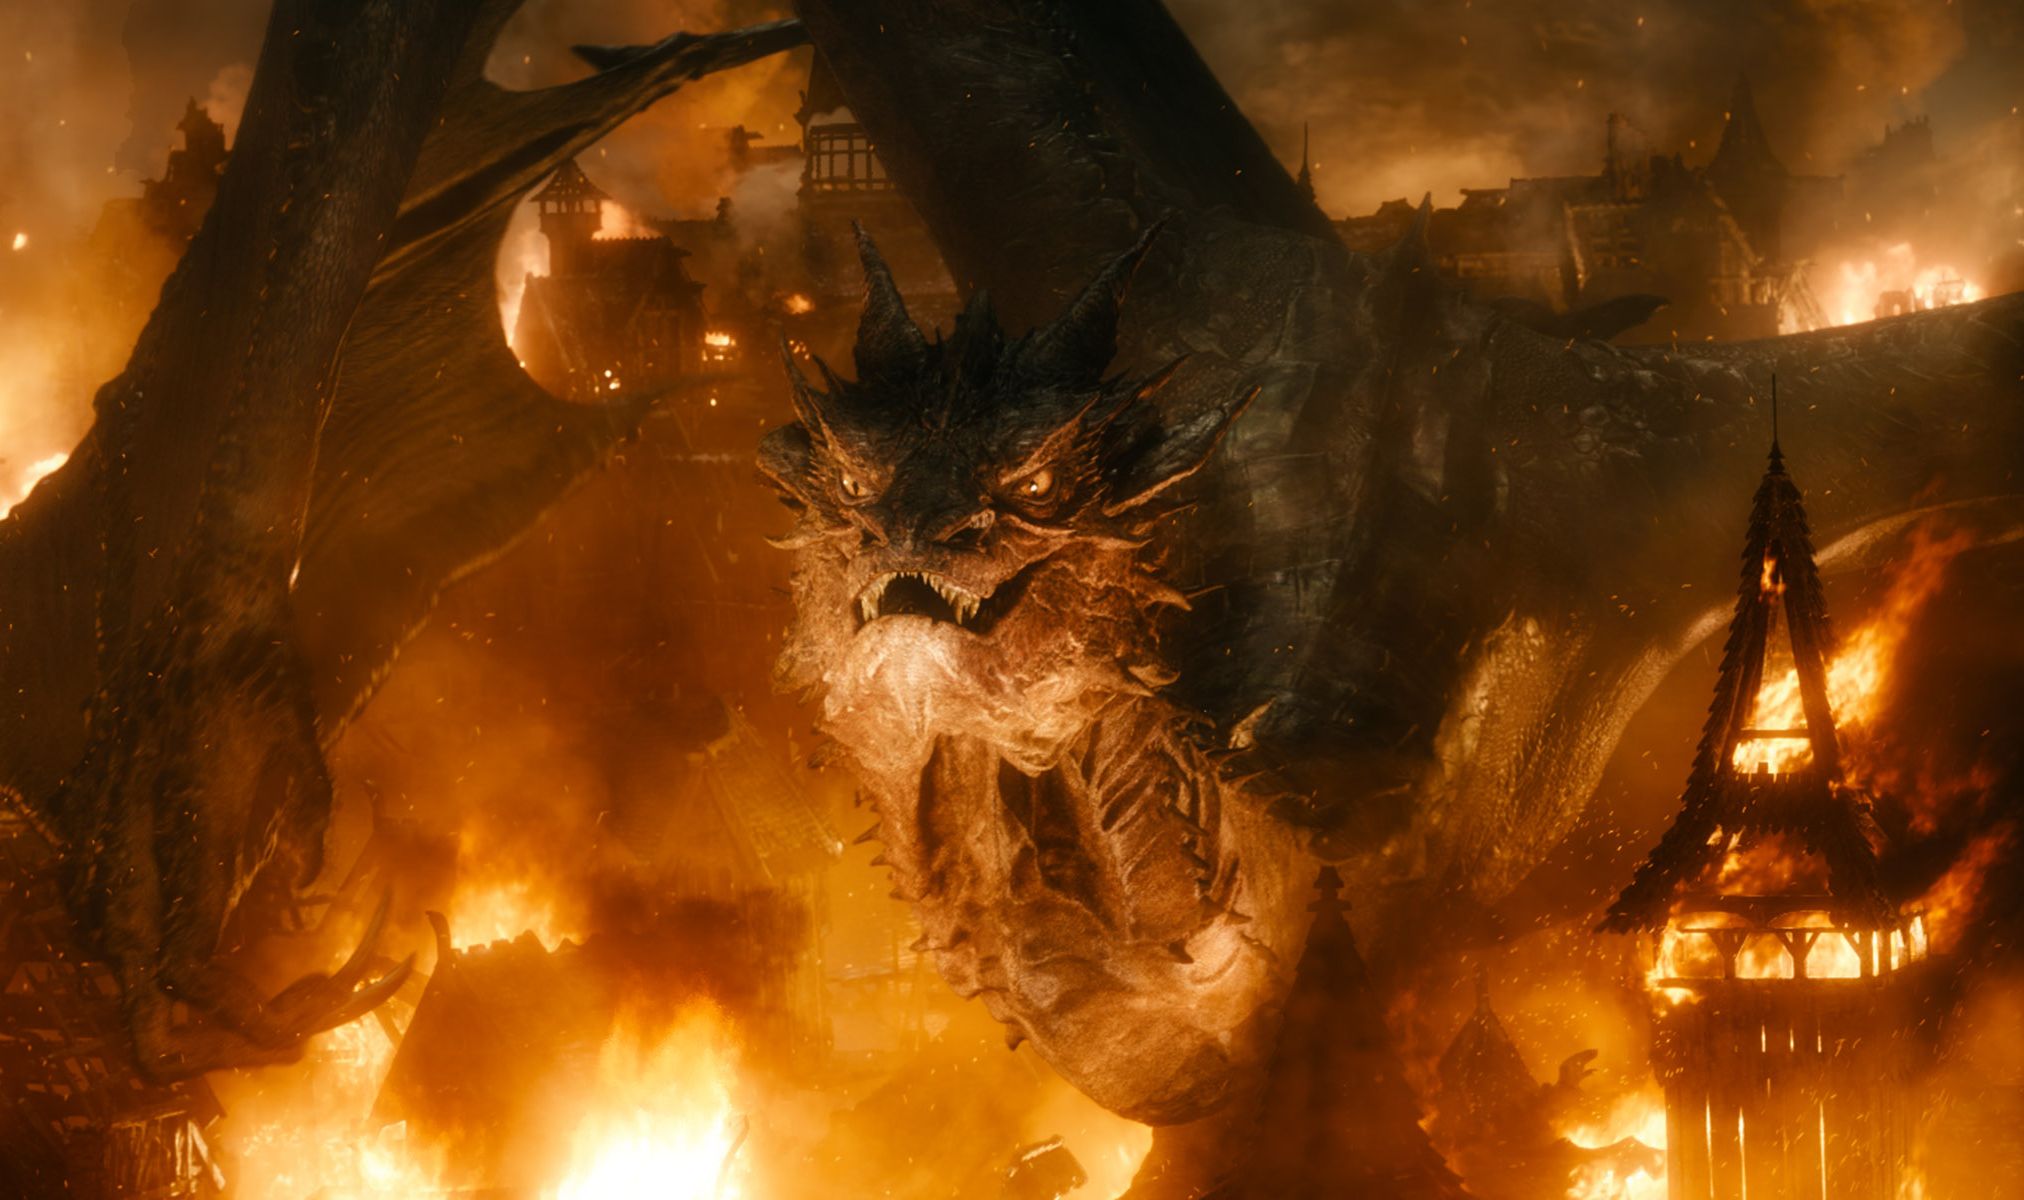 Smaug frontal in the final Hobbit film